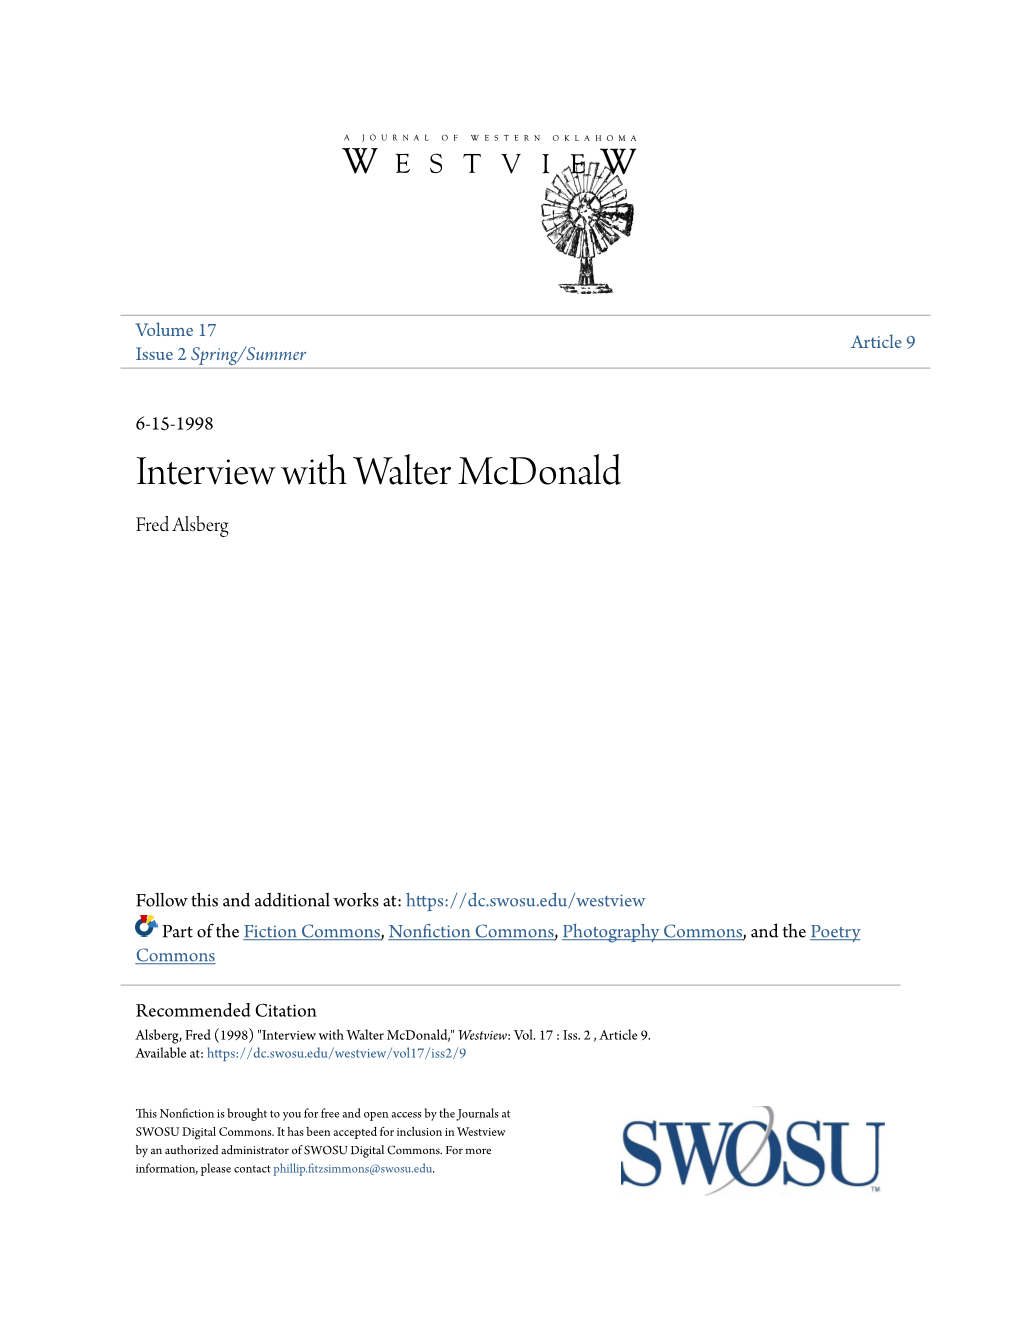 Interview with Walter Mcdonald Fred Alsberg